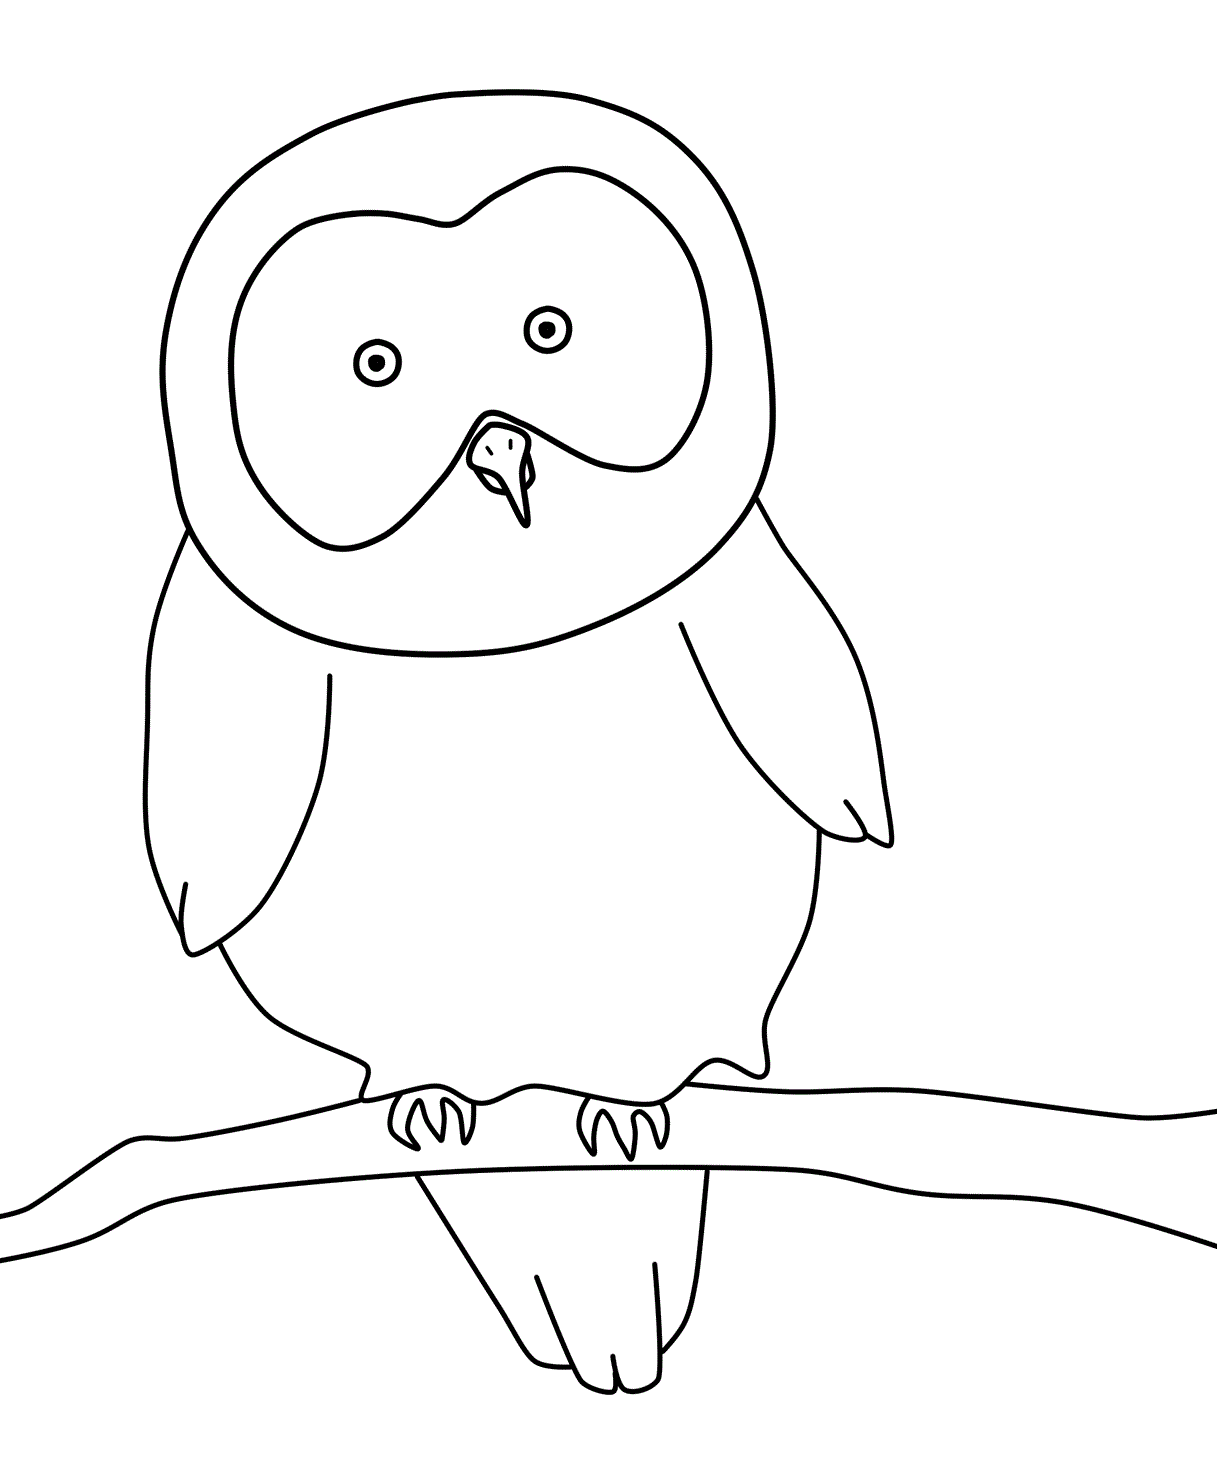 Coloring Pages of Owls